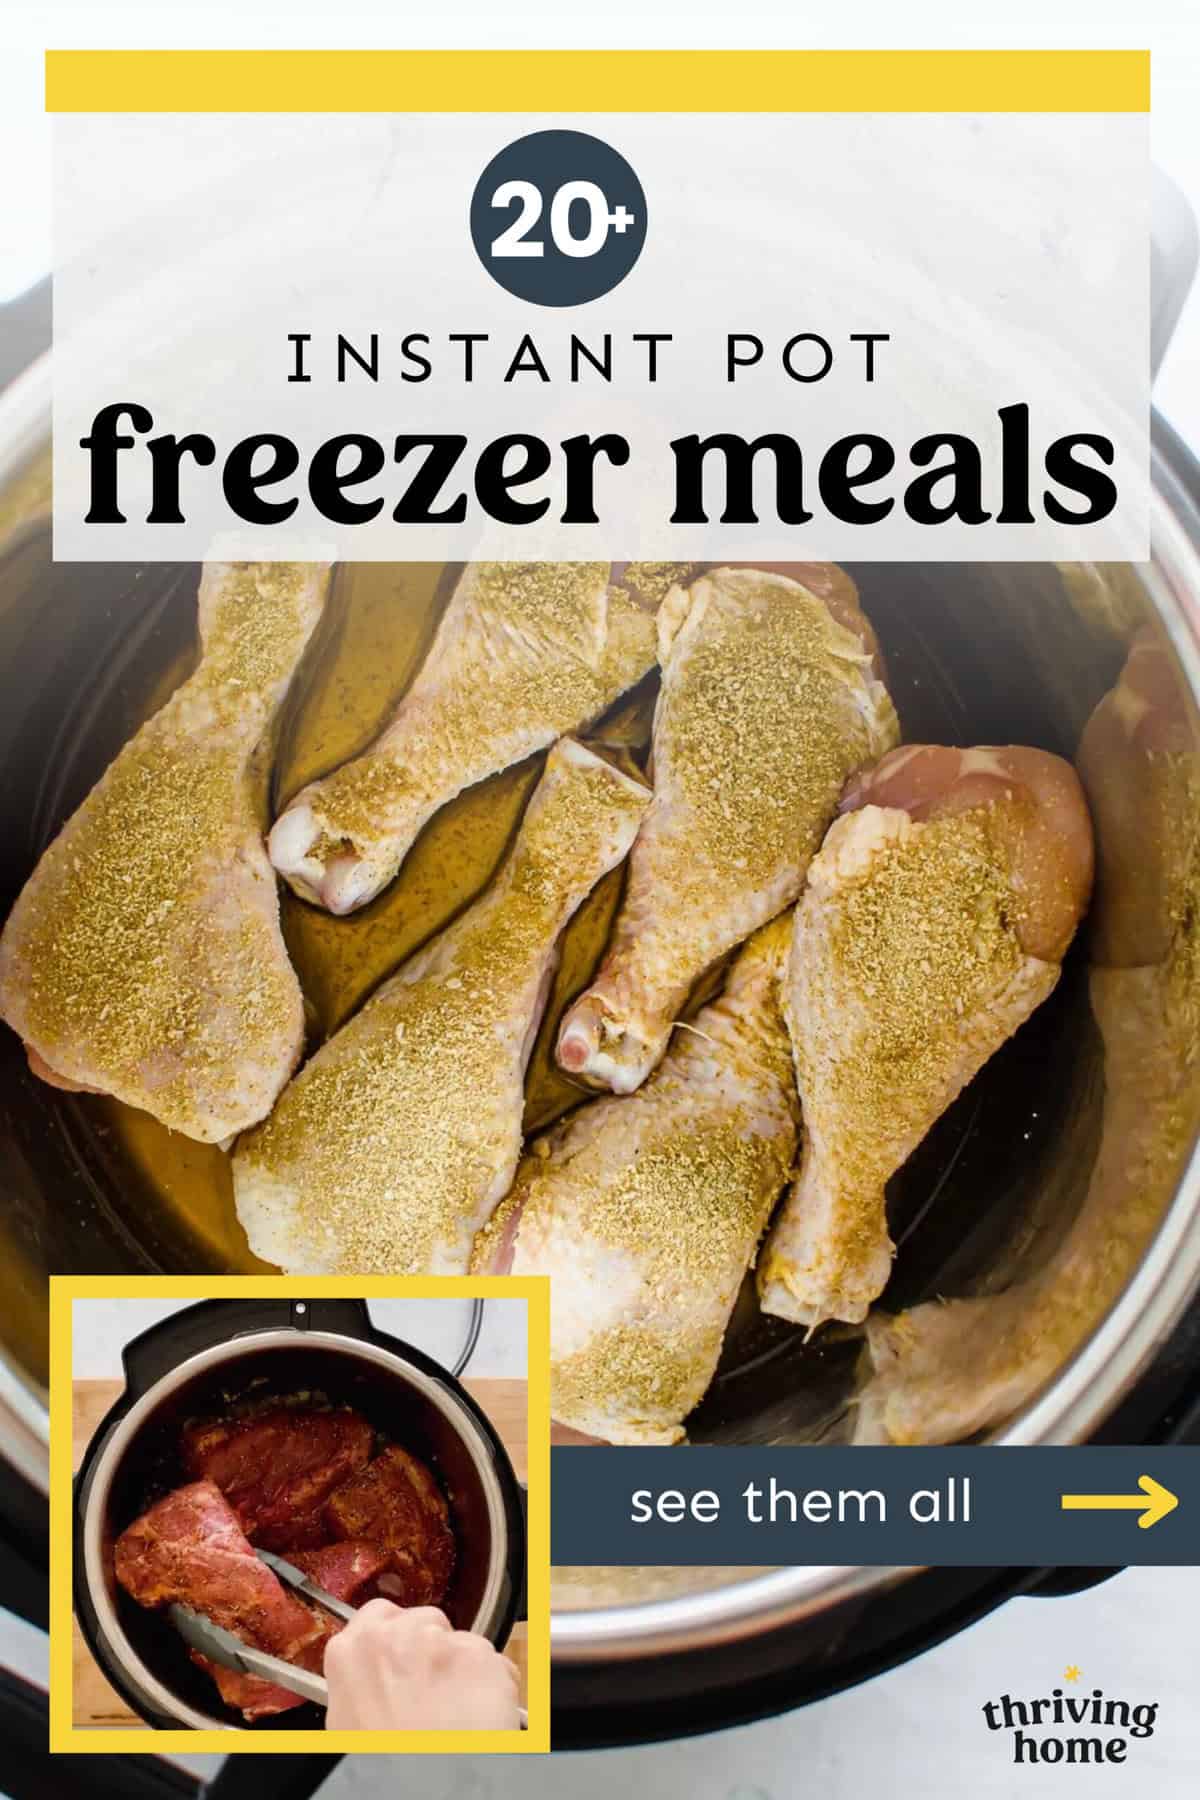 Drumsticks in an Instant Pot with an inset of beef roast in an Instant Pot and words that say 20+ Instant Pot Freezer Meals.